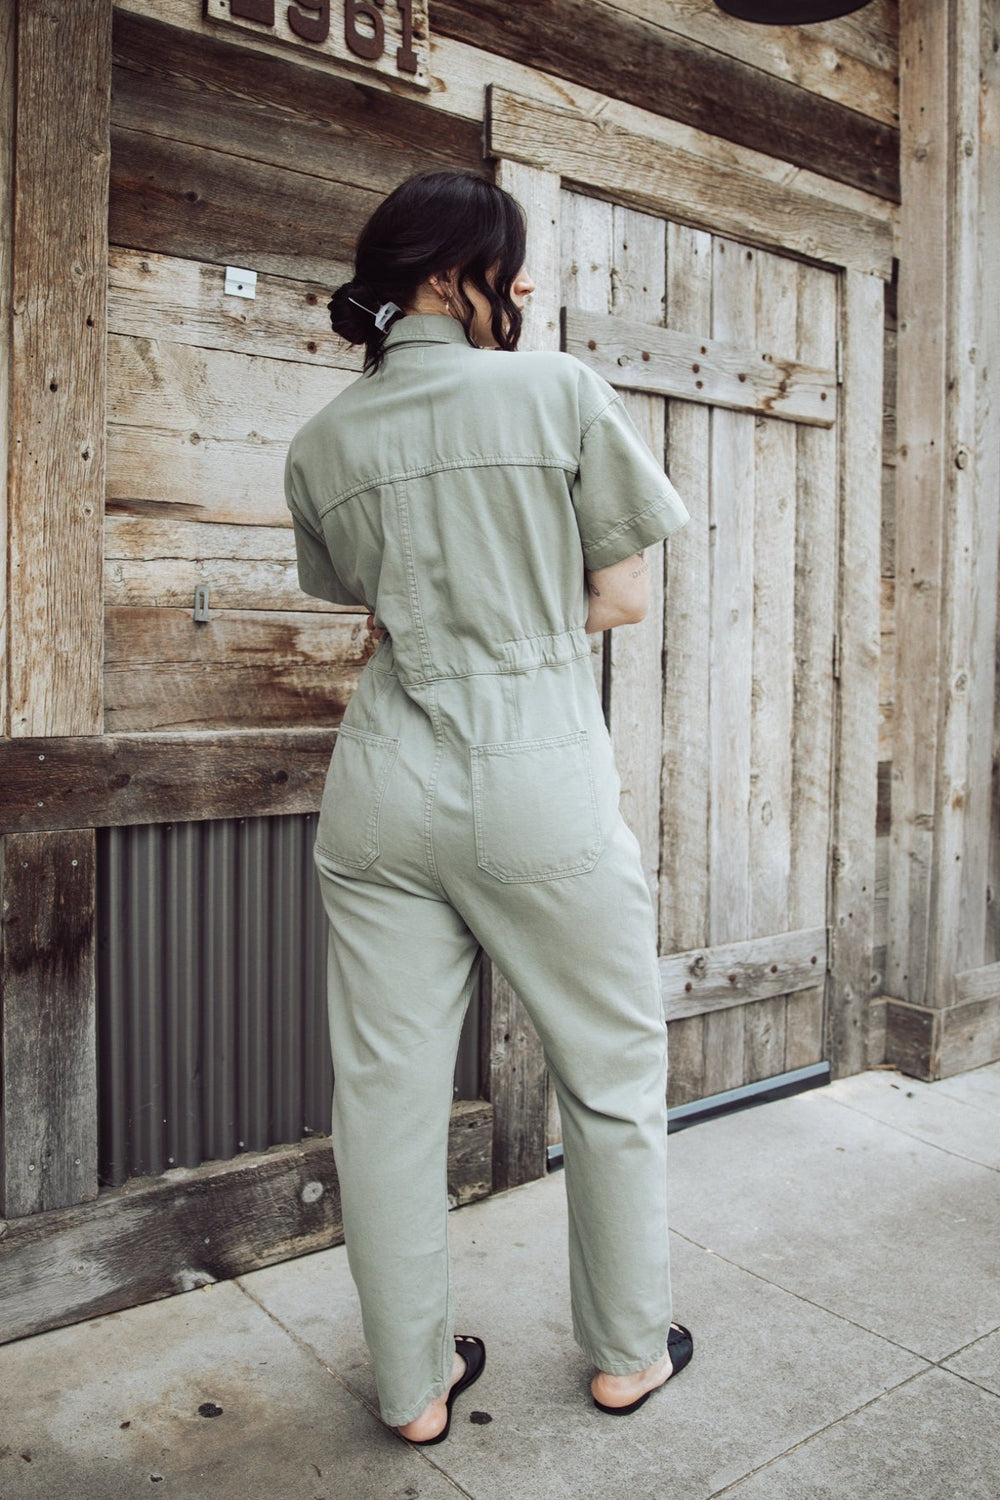 FREE PEOPLE MARCI DENIM JUMPSUIT - WASHED ARMY